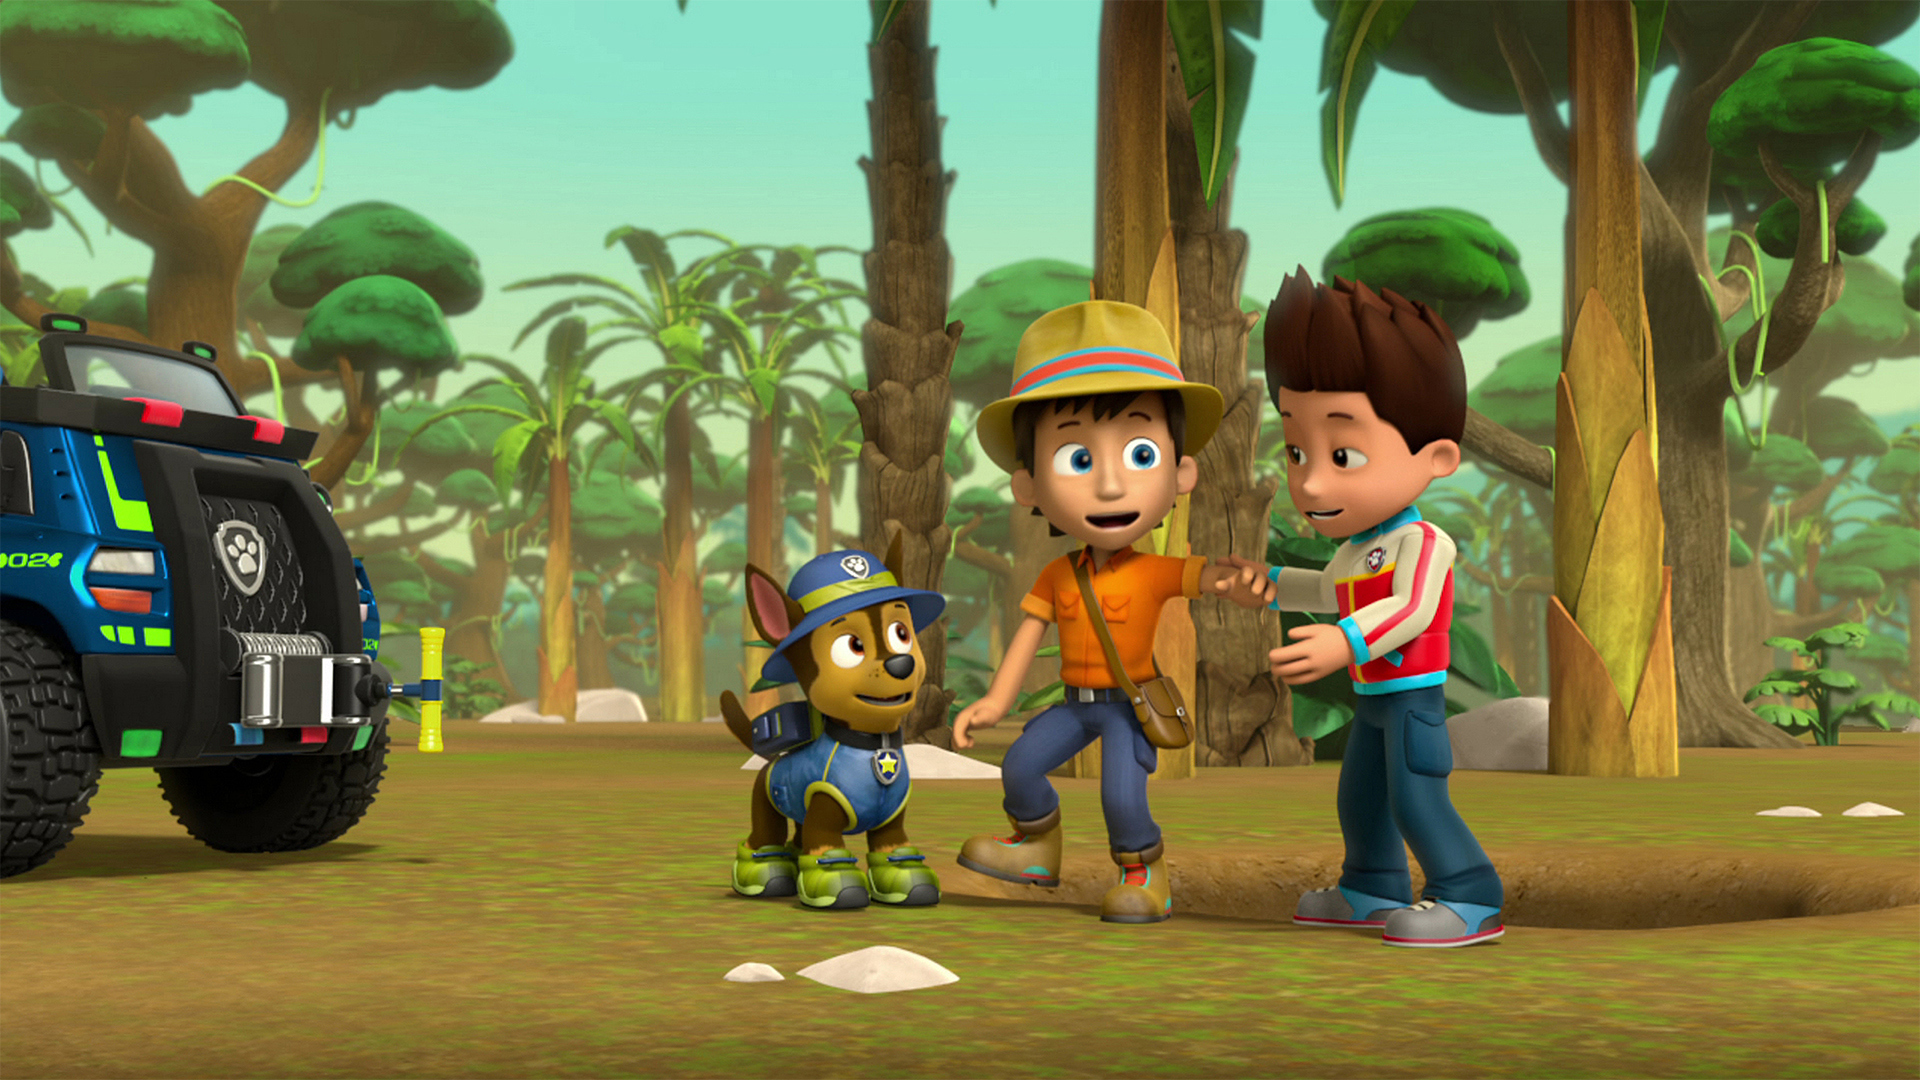 Watch PAW Patrol Season 3 Episode 15: Tracker Joins the Pups! - Full show  on Paramount Plus